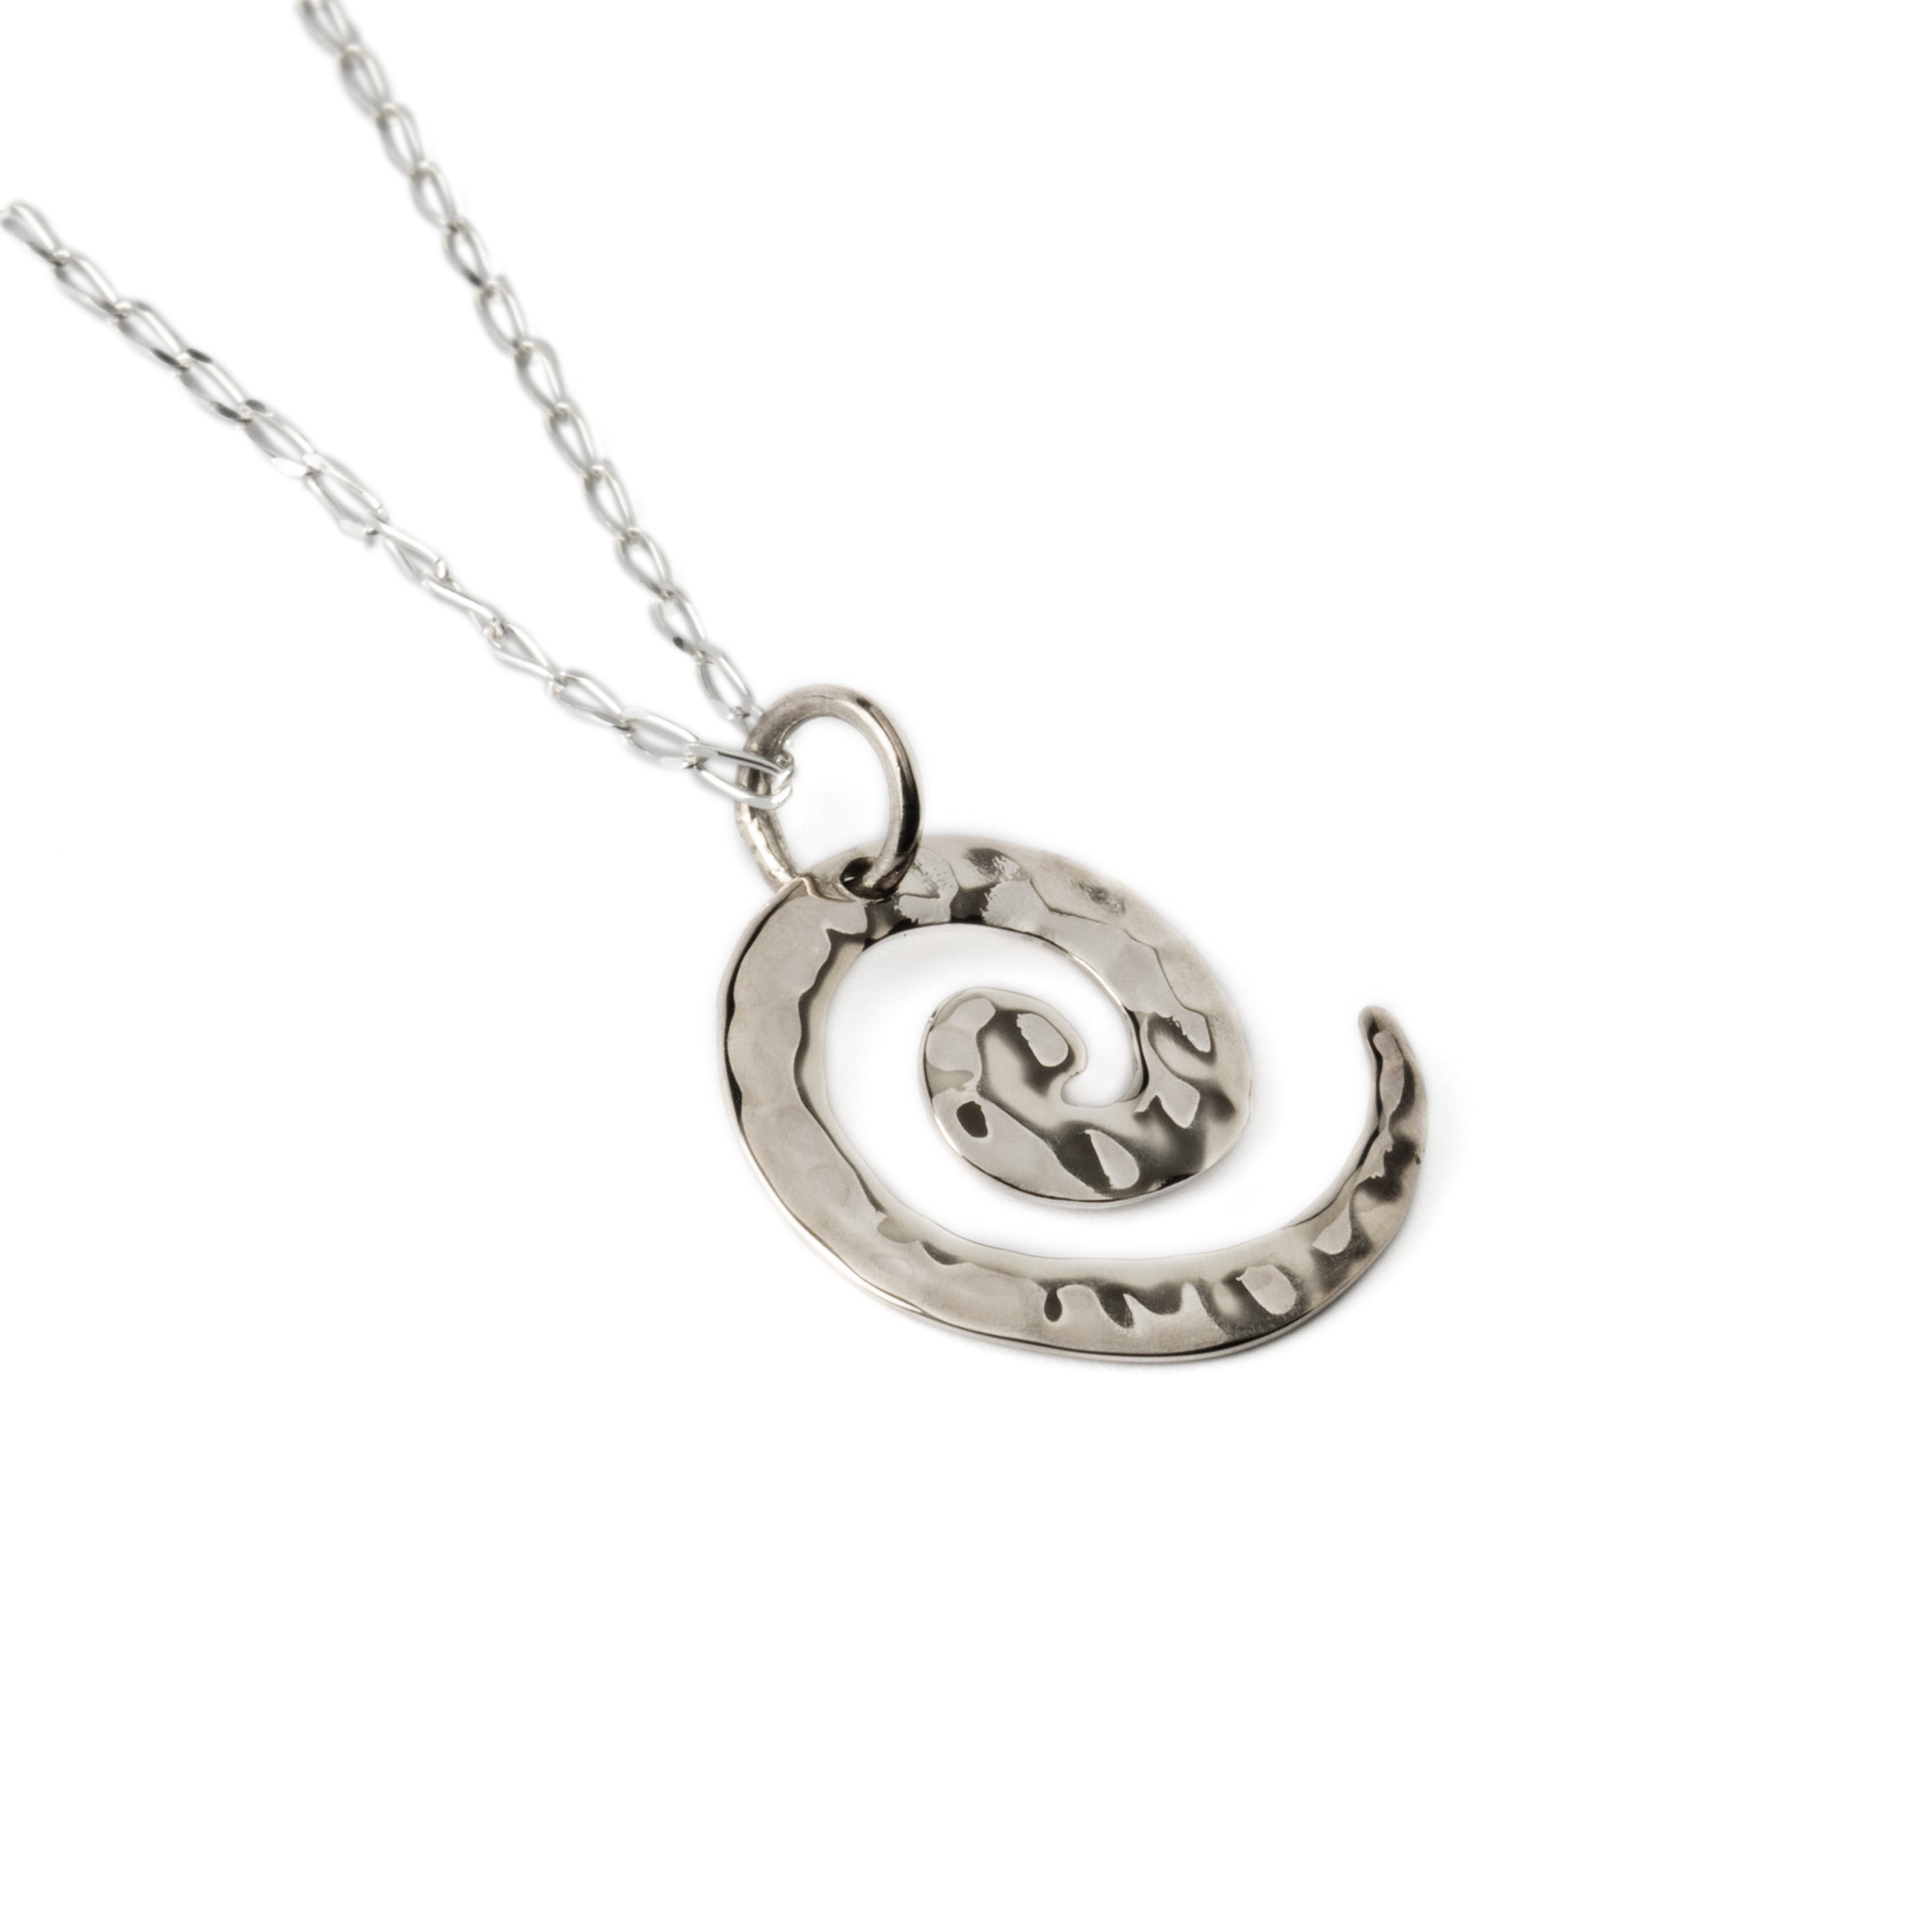 Hammered silver spiral charm necklace left side view